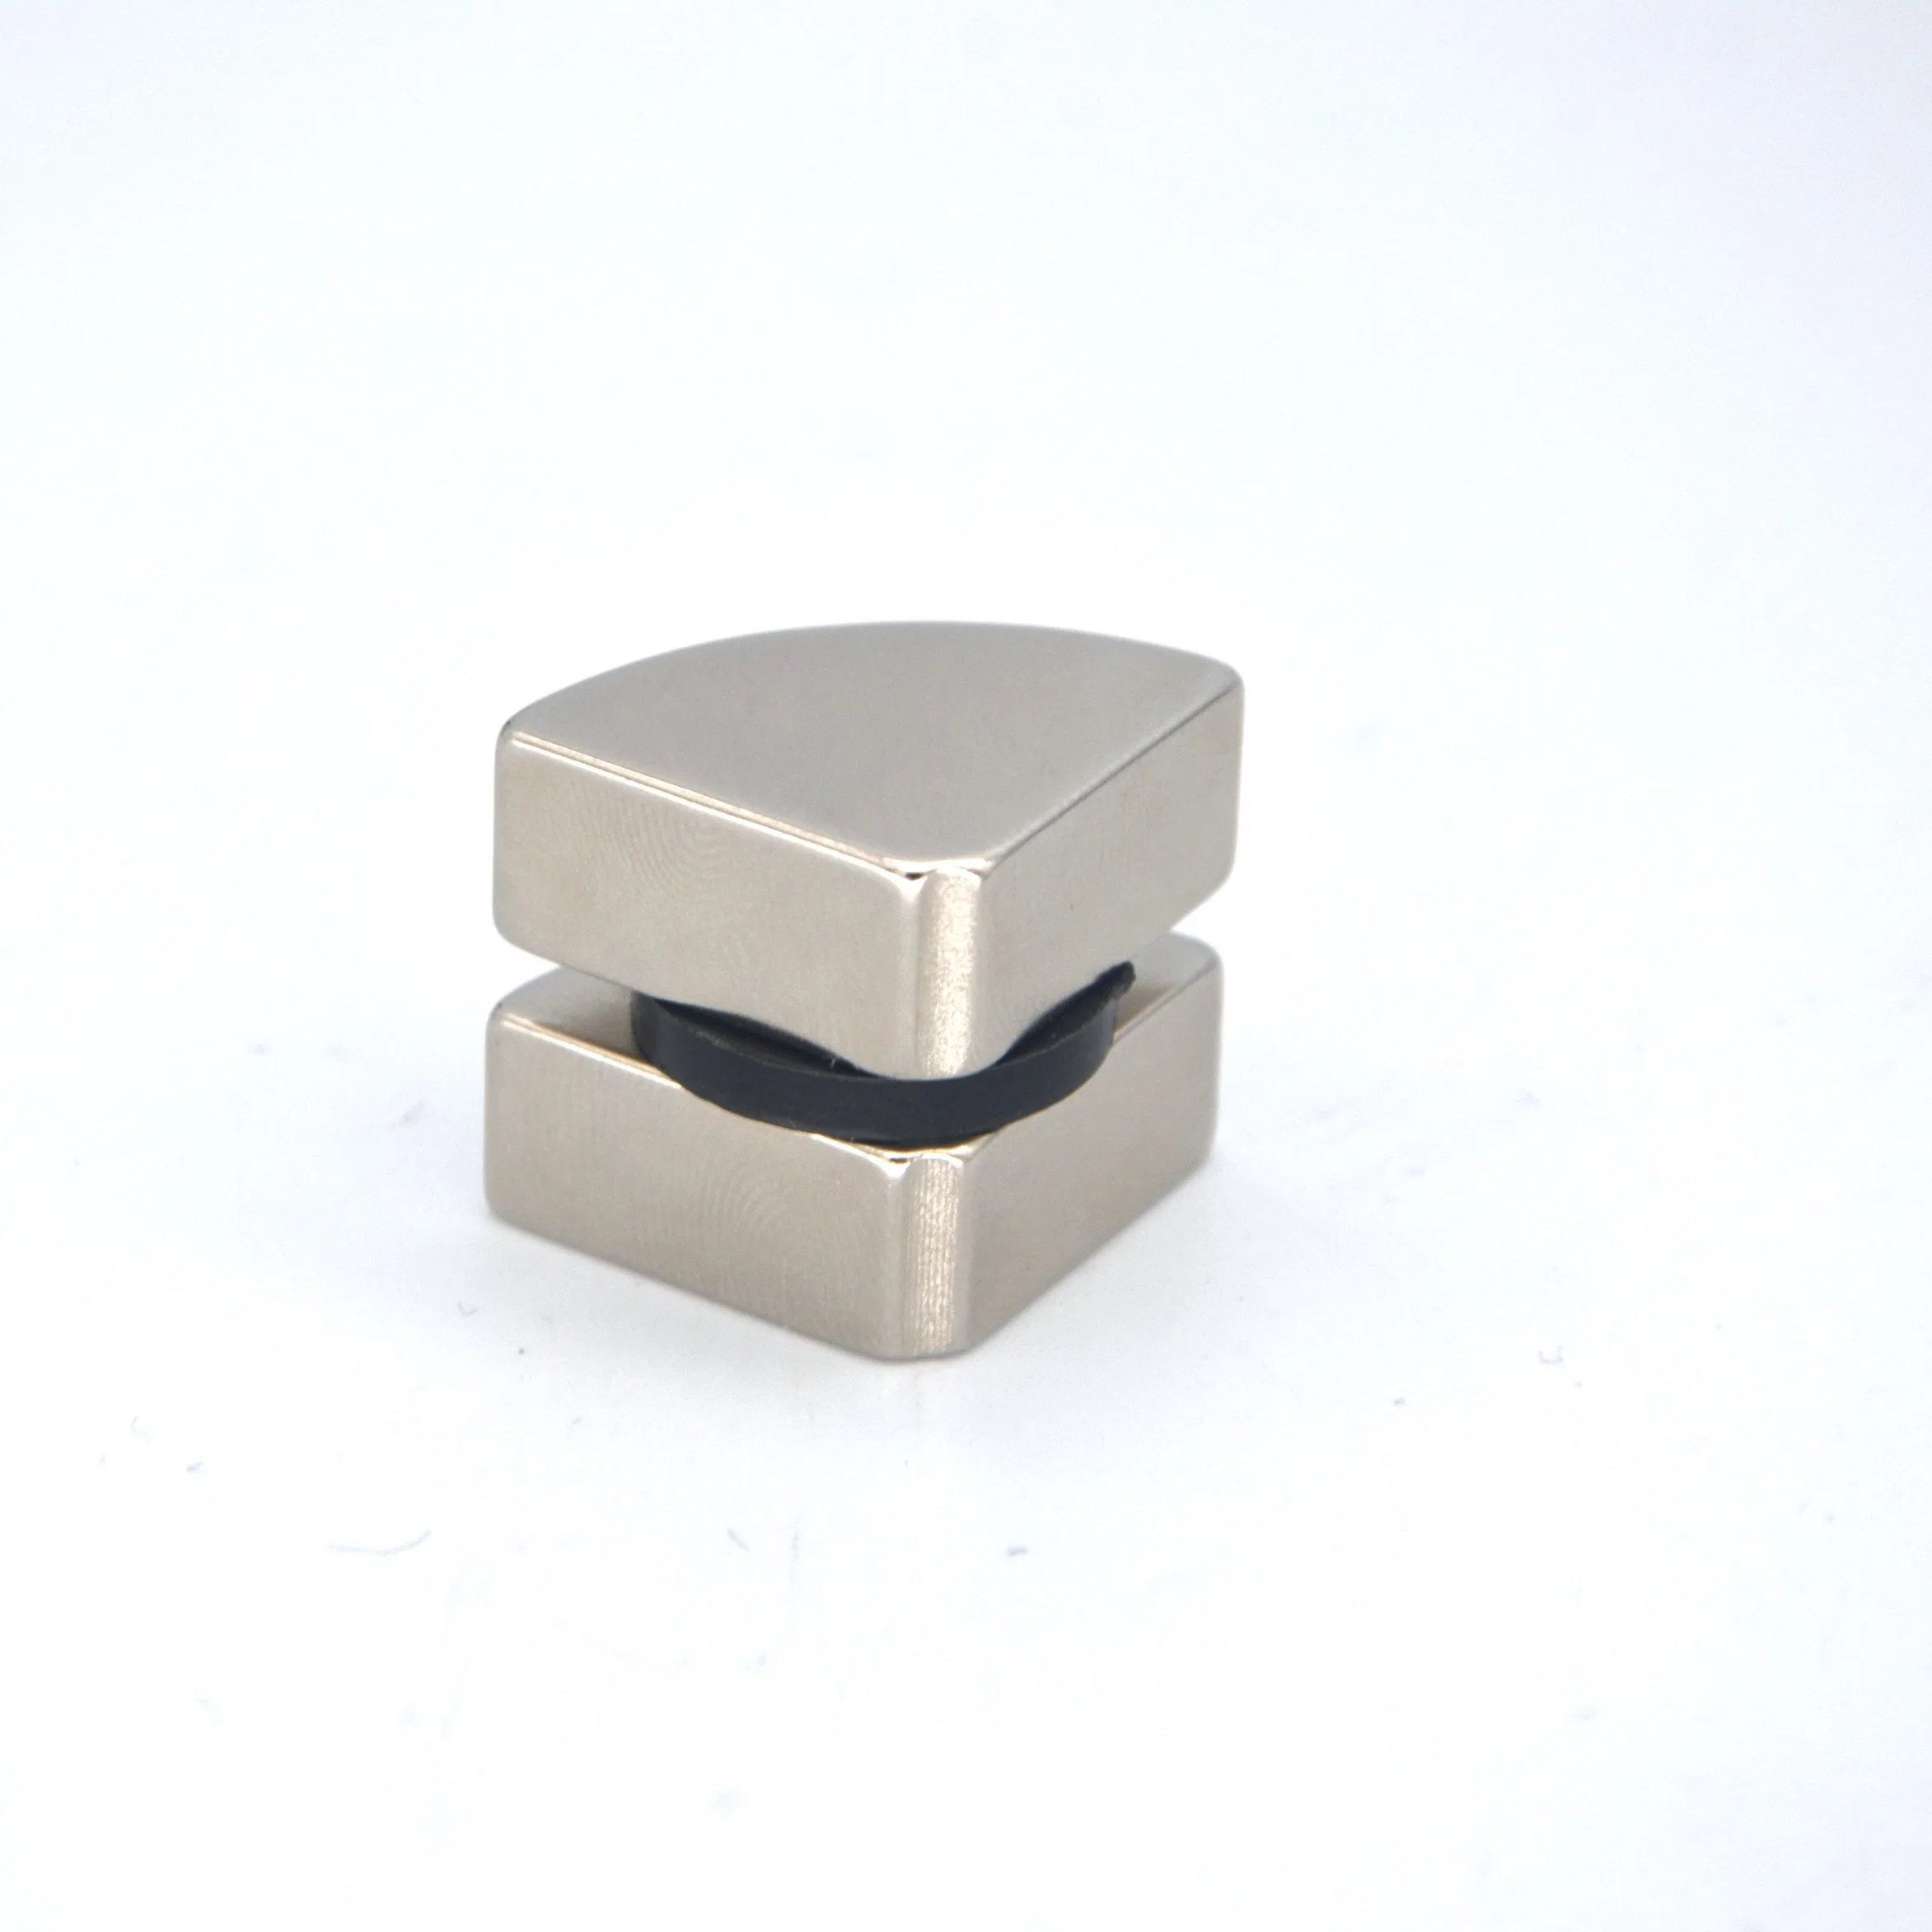 High Performance NdFeB Magnetic Material Factory Customize Arc Magnet Fan-Shaped Permanent Magnet Neodymium Strong Magnet for Motor